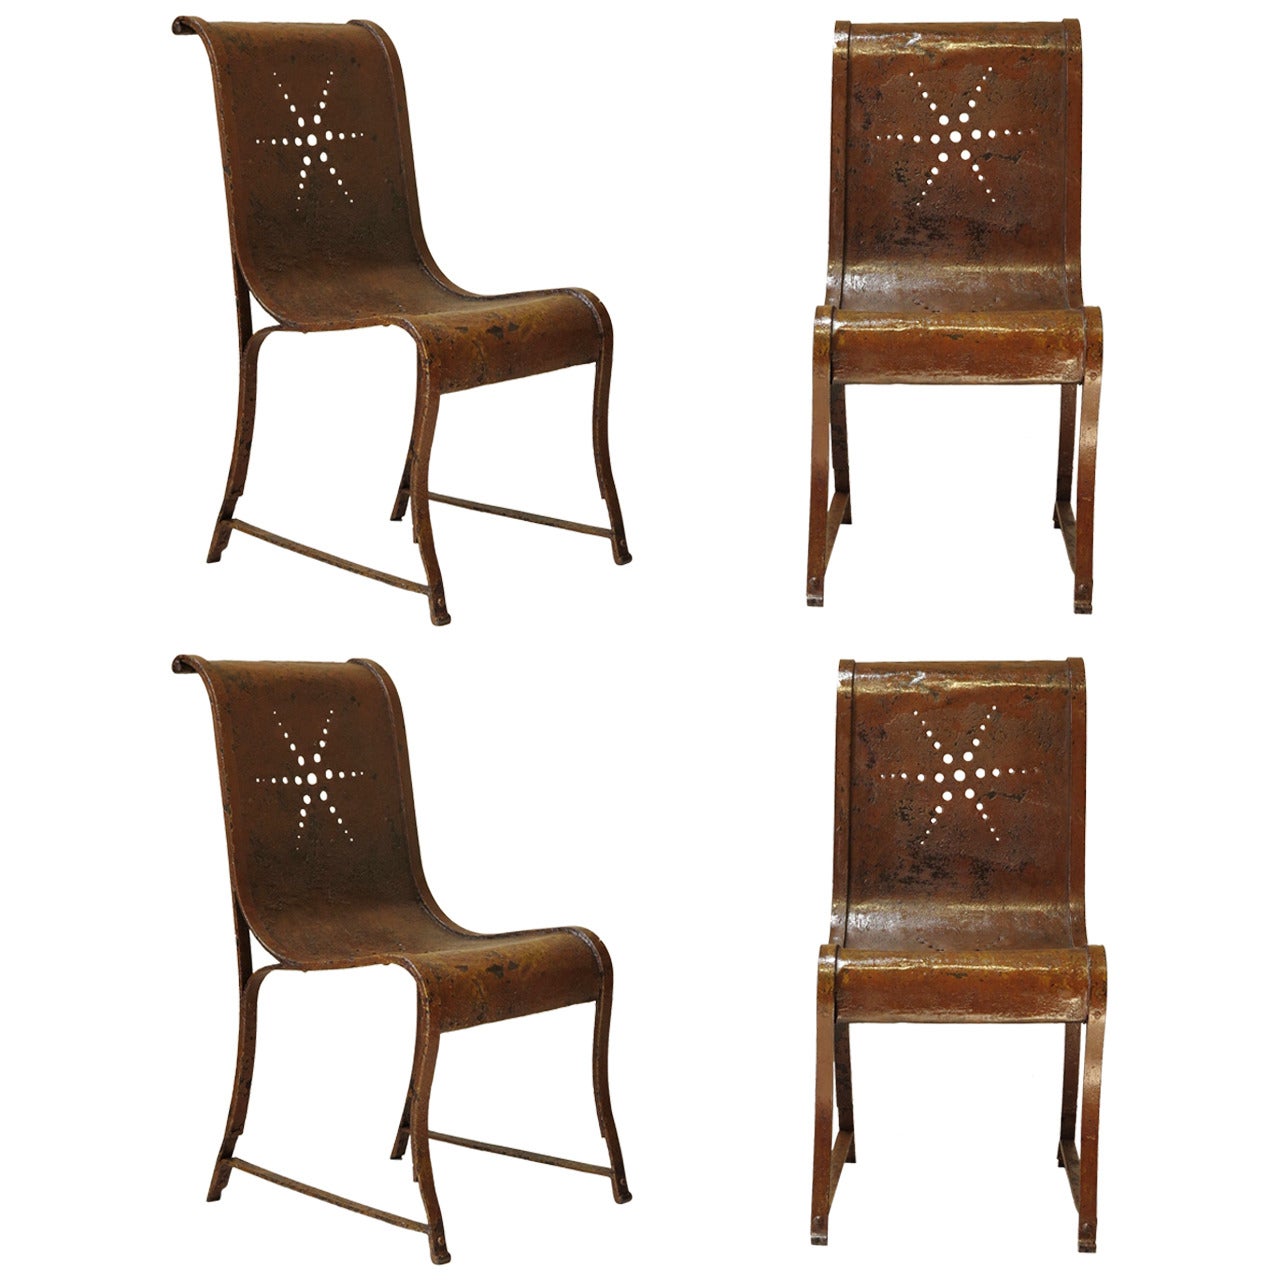 Rare Set of Four Wrought Iron Chairs with Star Design, France, circa 1920s